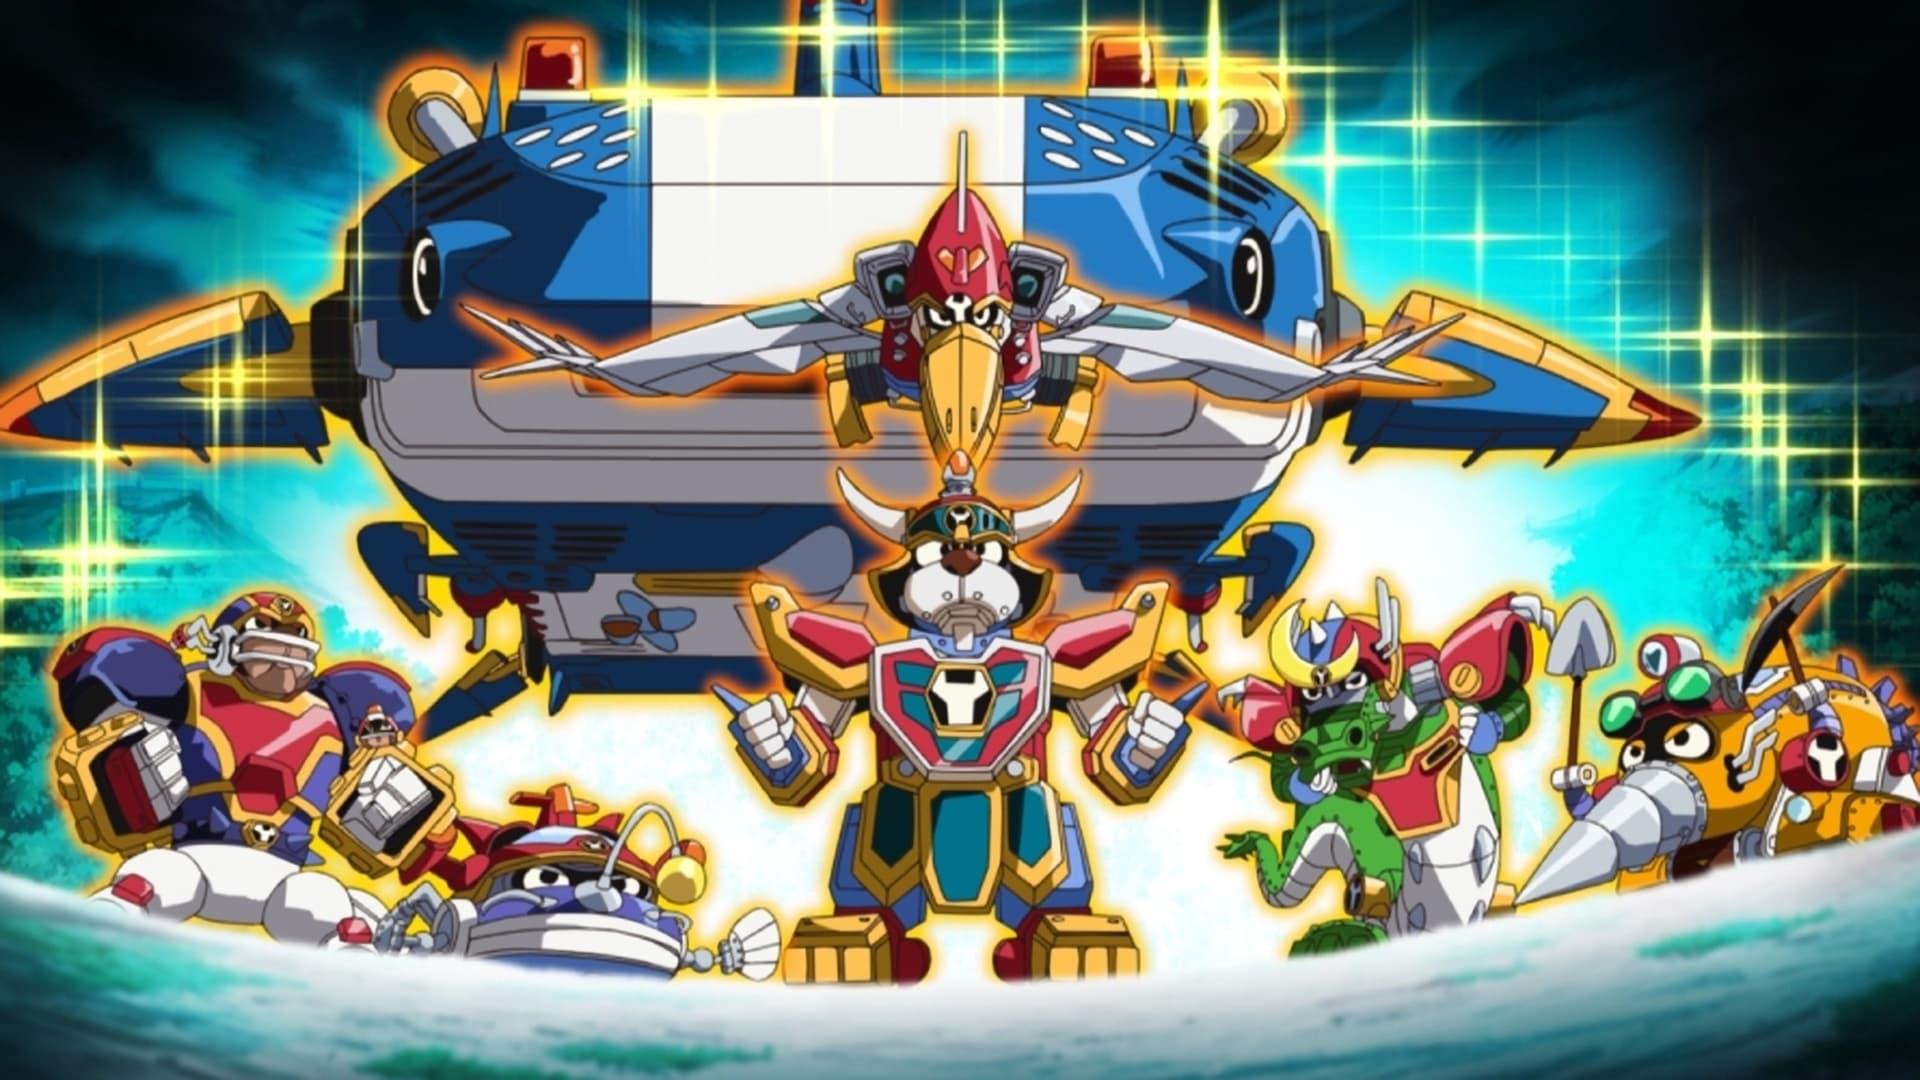 Yatterman: All New YatterMechas Assembled! Great Decisive Battle in the Toy Kingdom! backdrop